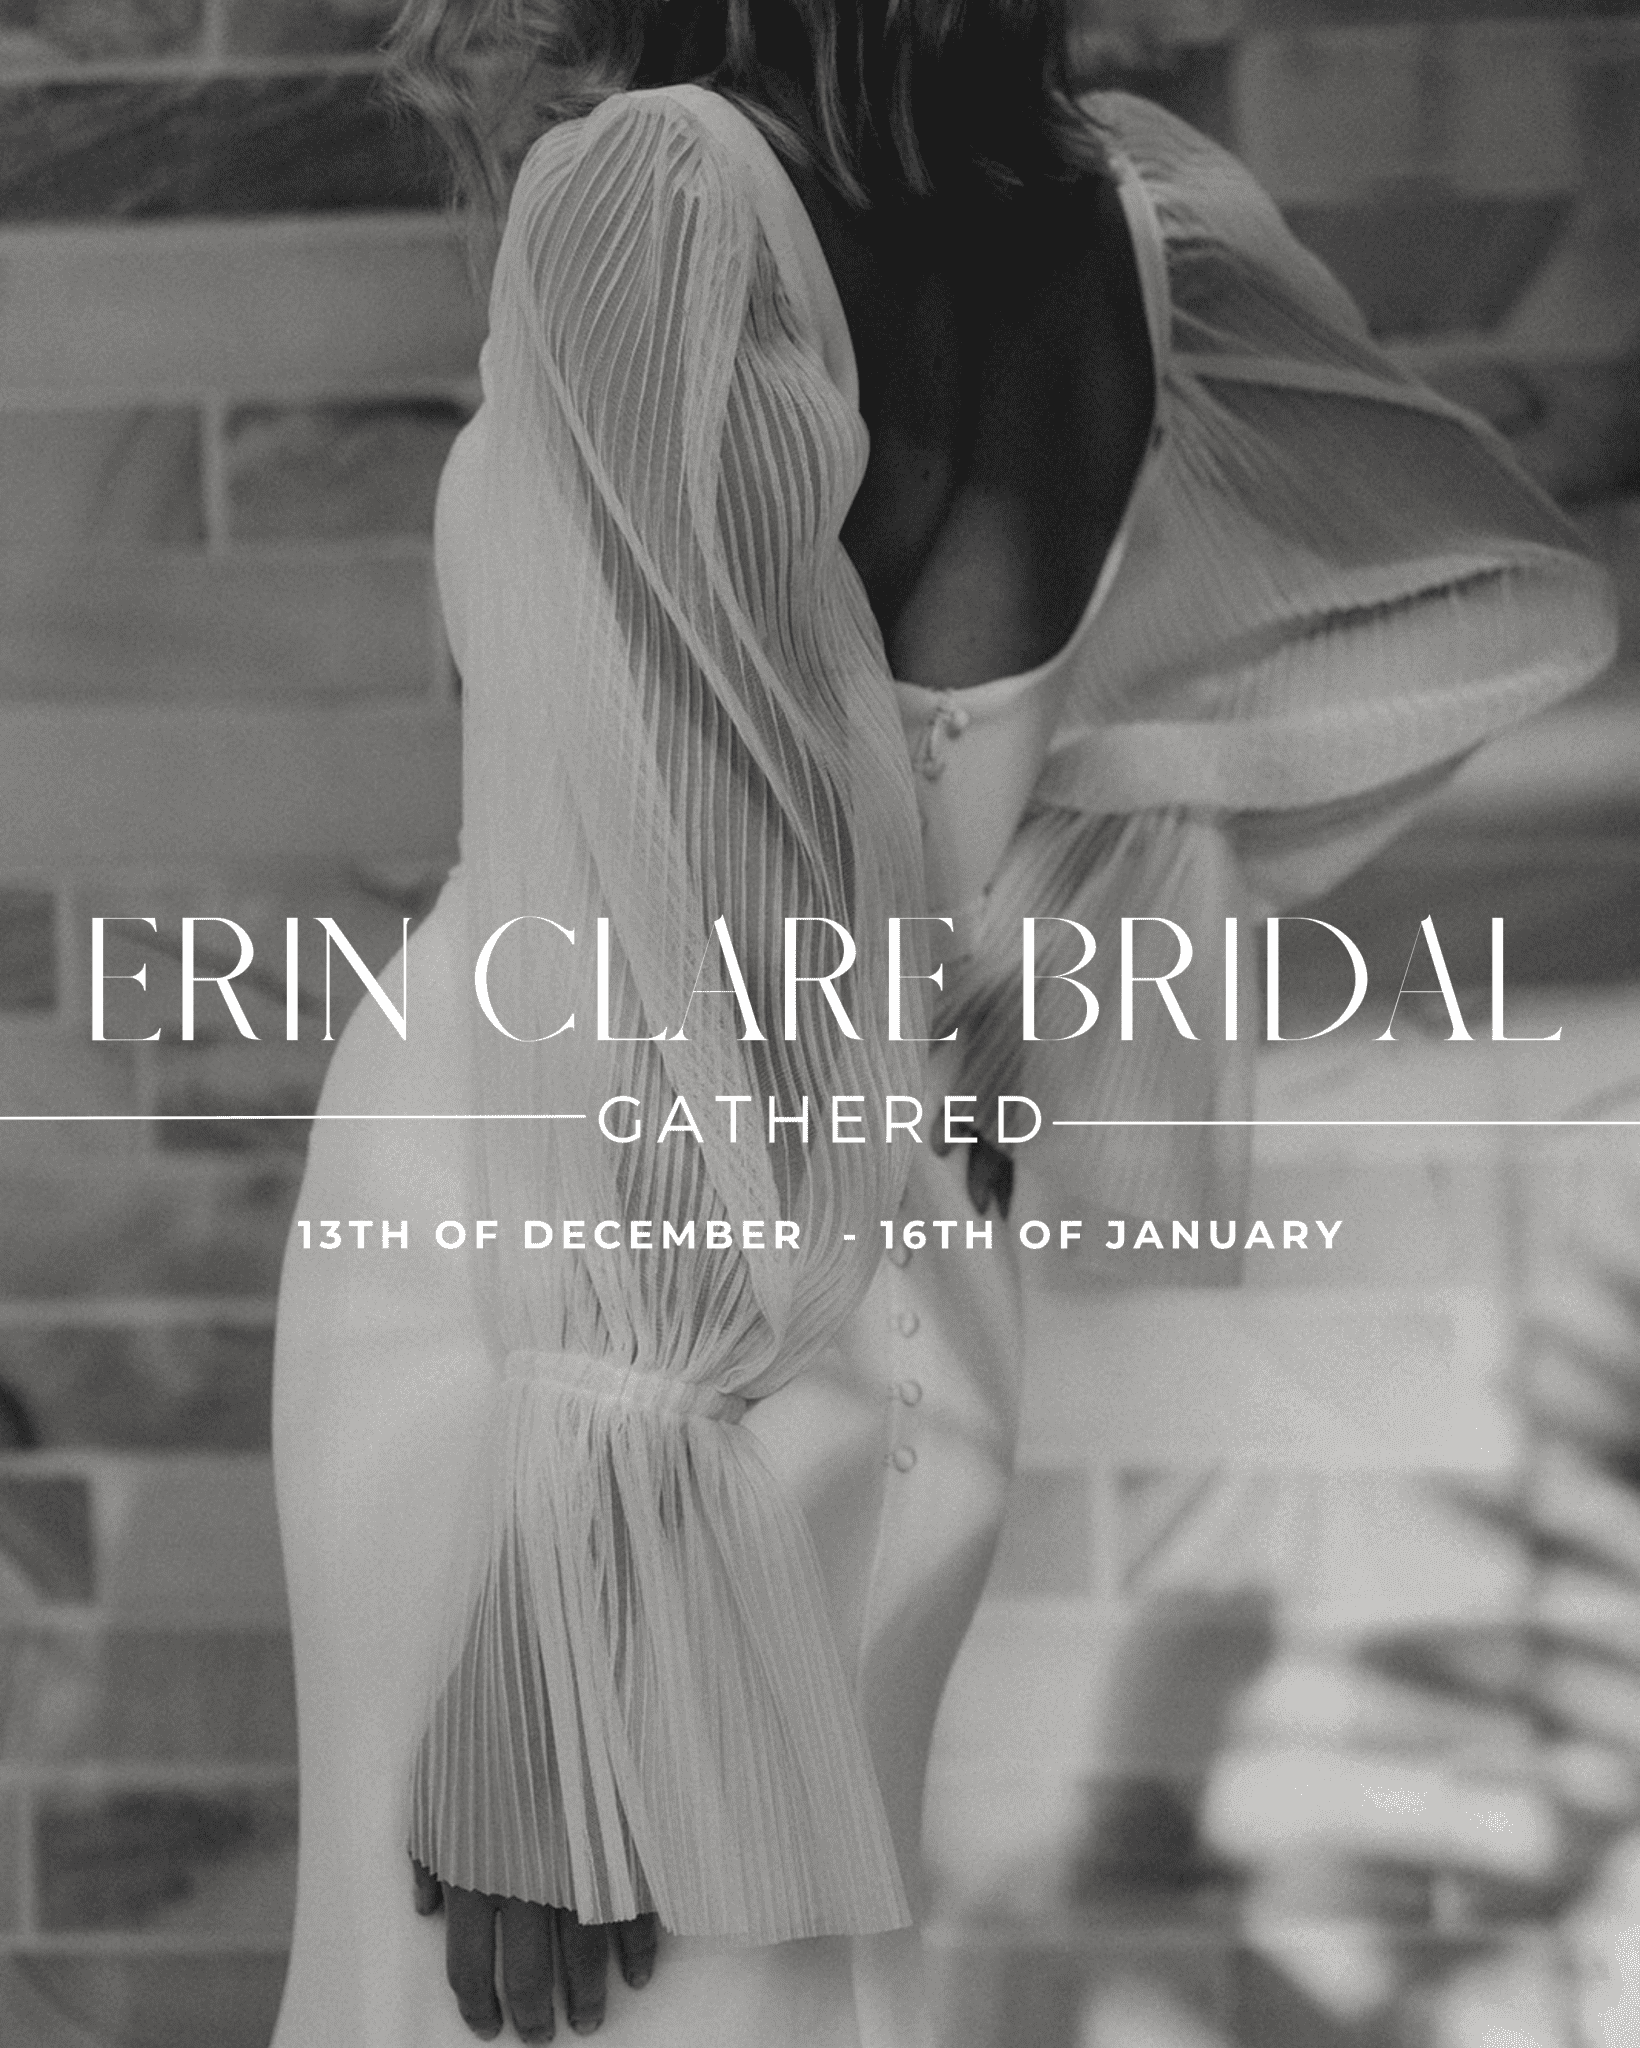 Gathered by Erin Clare Bridal | Dec 13th to Jan 16th 2022 - White Lily Couture